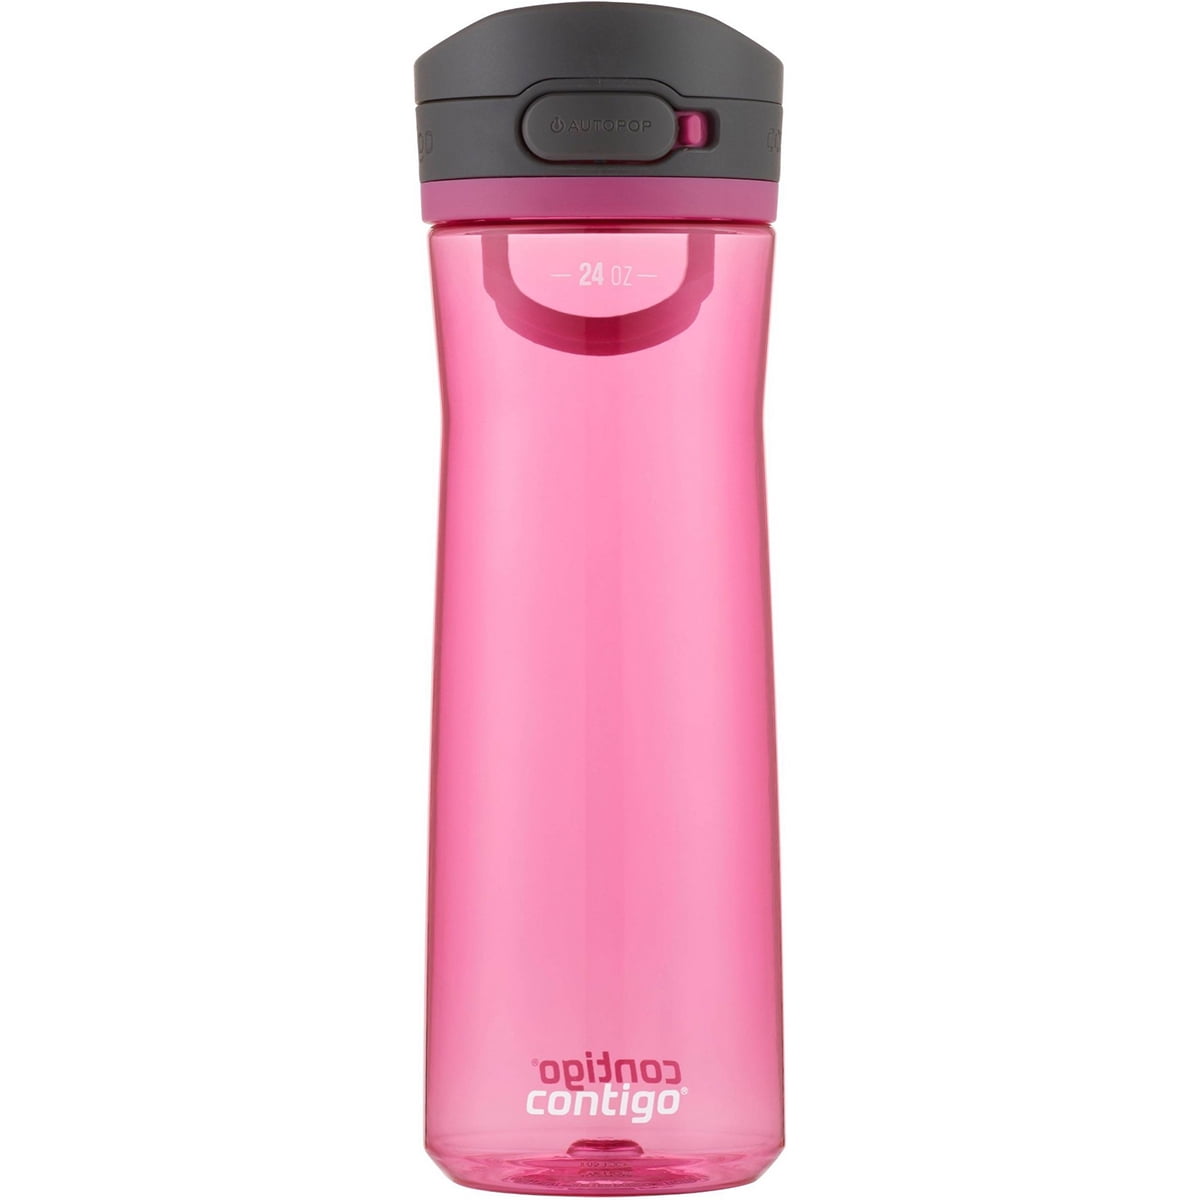 Contigo Jackson Reusable Water Bottle - BPA Free, Easy Push Button, Carry  Loop - Top Rack Dishwasher Safe - Great for Sports, Home, Travel- 24oz,  Greyed Jade, R…